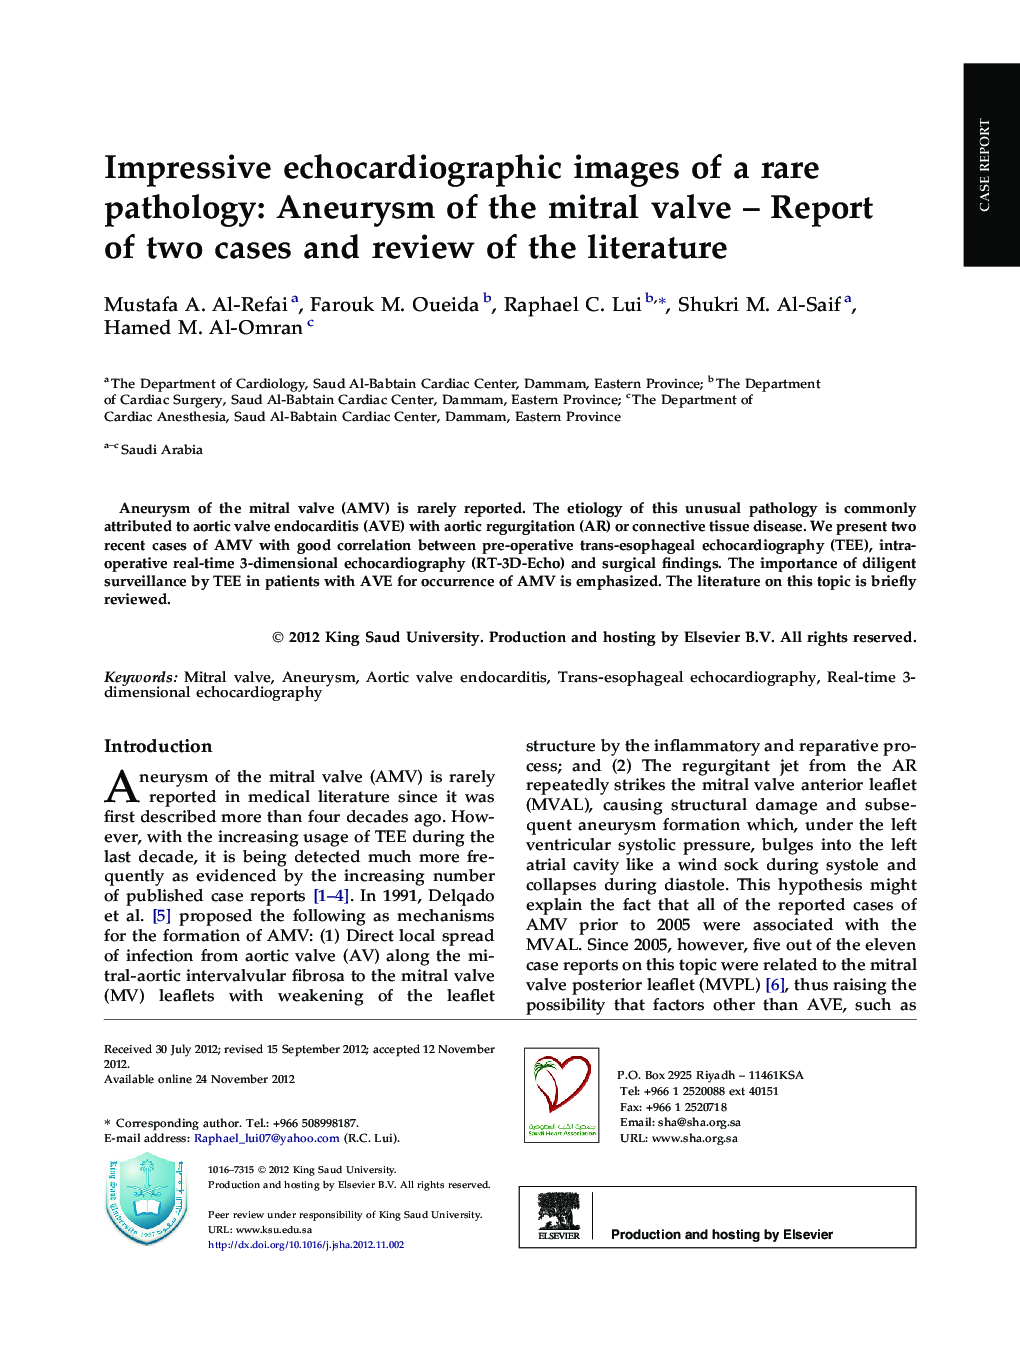 Impressive echocardiographic images of a rare pathology: Aneurysm of the mitral valve – Report of two cases and review of the literature 